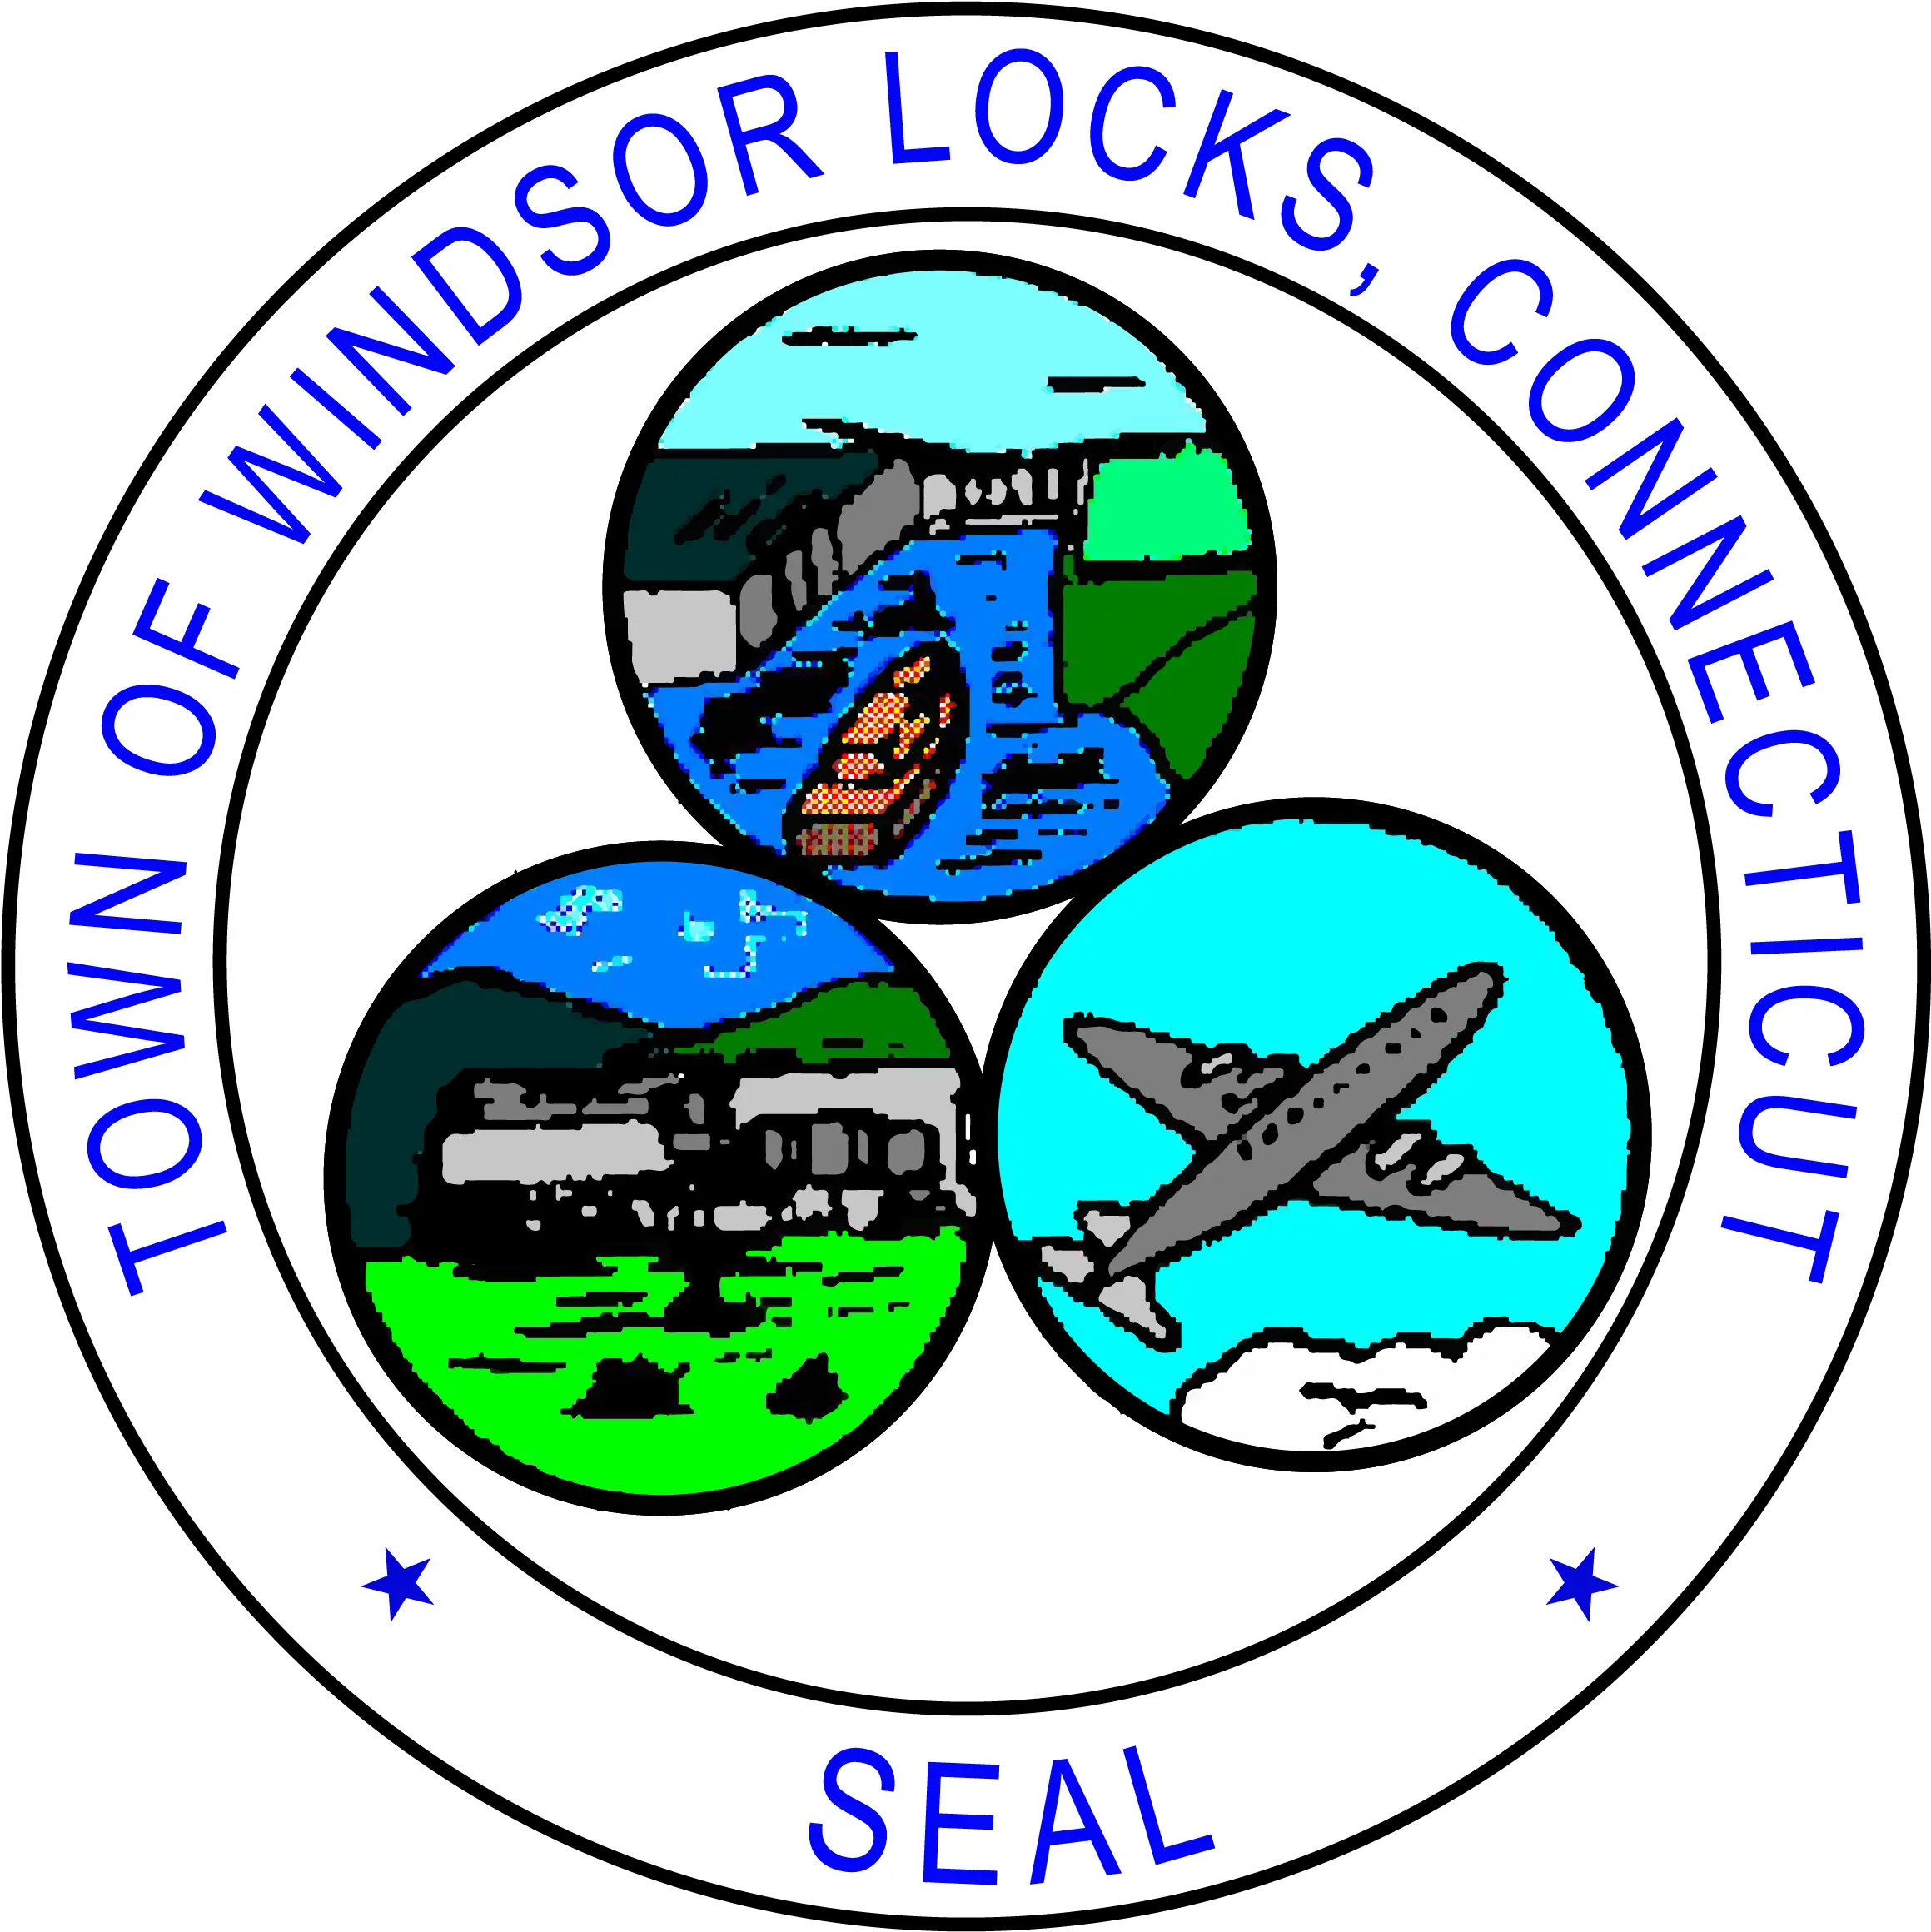 Home Town Of Windsor Locks Connecticut Bay Shore School District Png Cks Icon